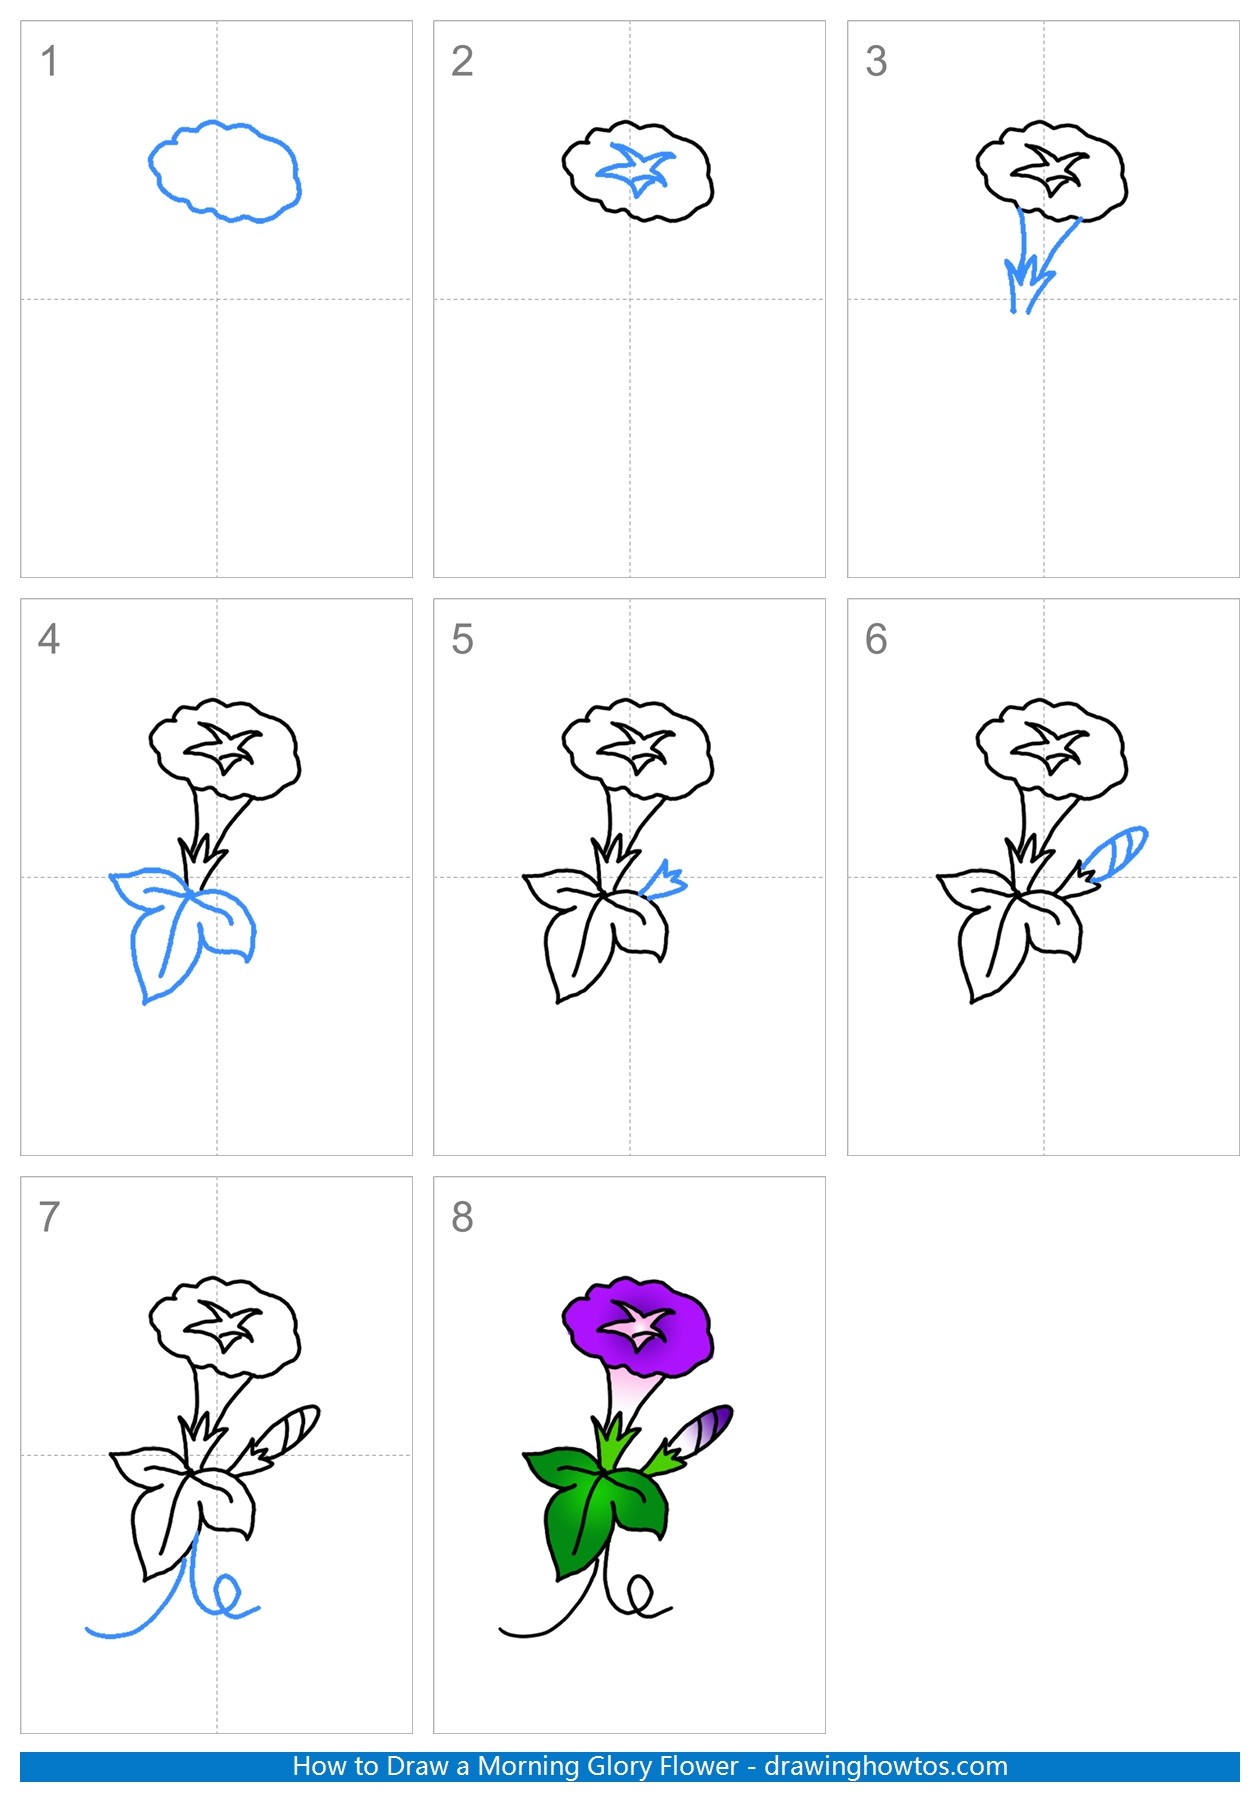 How to Draw a Morning Glory Flower Step by Step